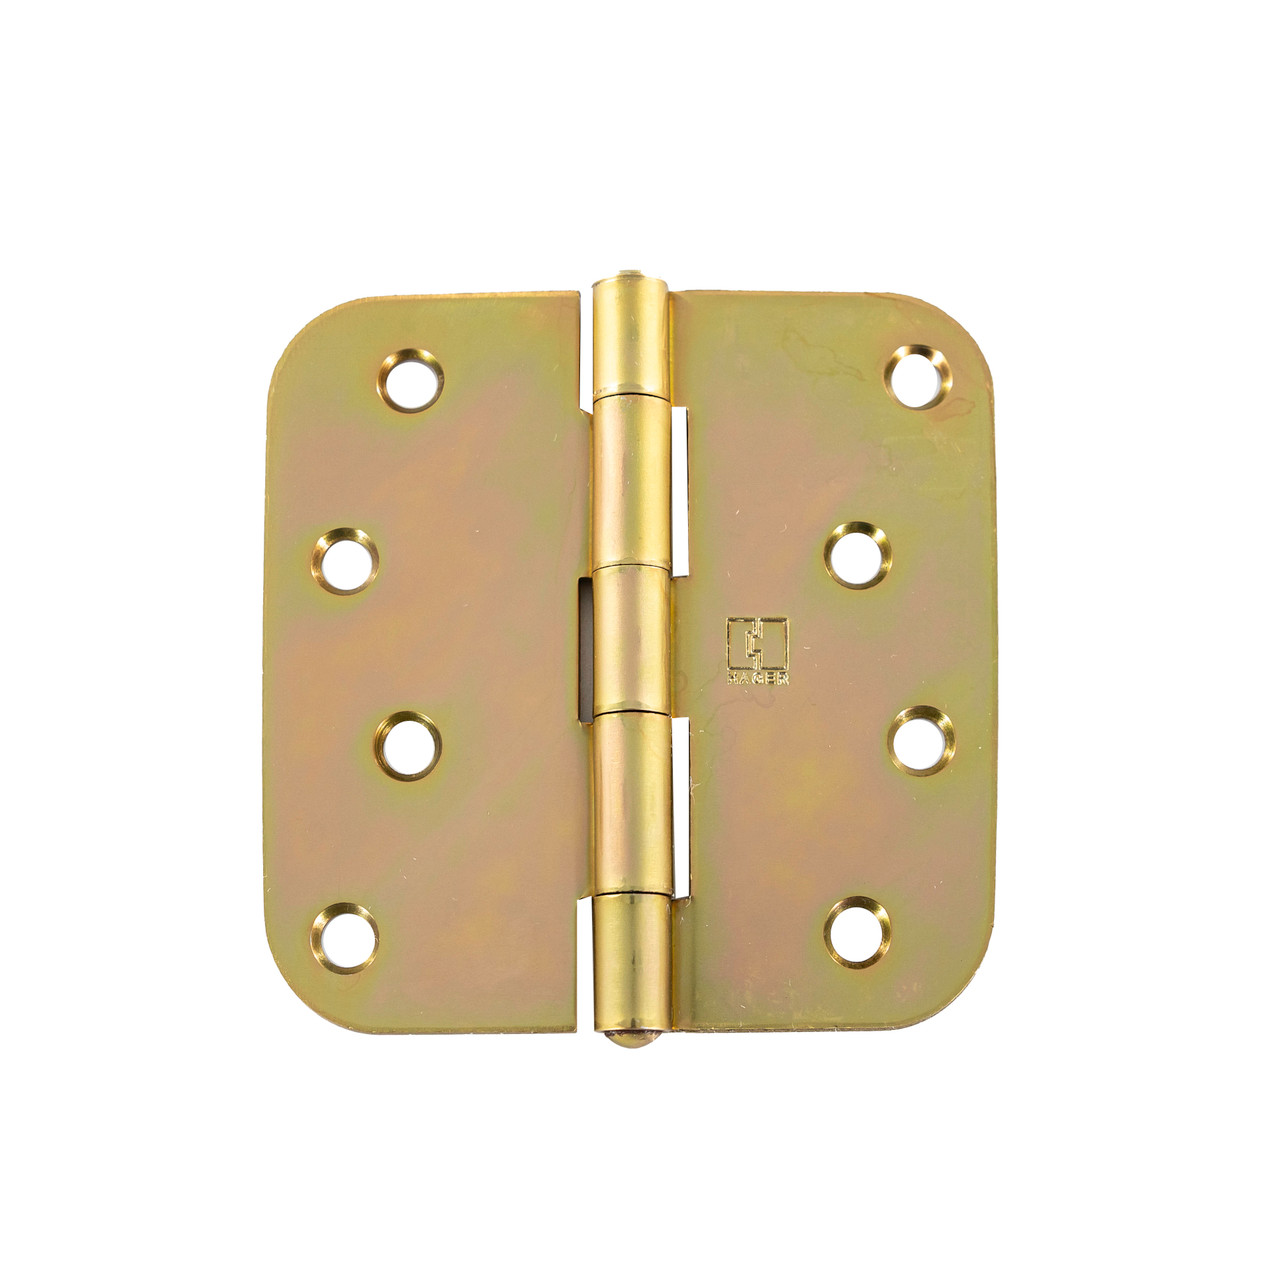 This image showcases the RC1846 4" x 4" Full Mortise Hinge in a stylish NRP brass tone dichromate finish. The hinge is crafted with precision, featuring a durable and corrosion-resistant design suitable for various applications. The 4" x 4" dimensions make it versatile for doors and cabinets. The Non-Removable Pin (NRP) adds an extra layer of security, preventing unauthorized removal. The brass tone dichromate finish not only provides an elegant appearance but also ensures long-lasting protection against the elements. This hinge exemplifies both functionality and aesthetic appeal, making it an ideal choice for quality hardware solutions.